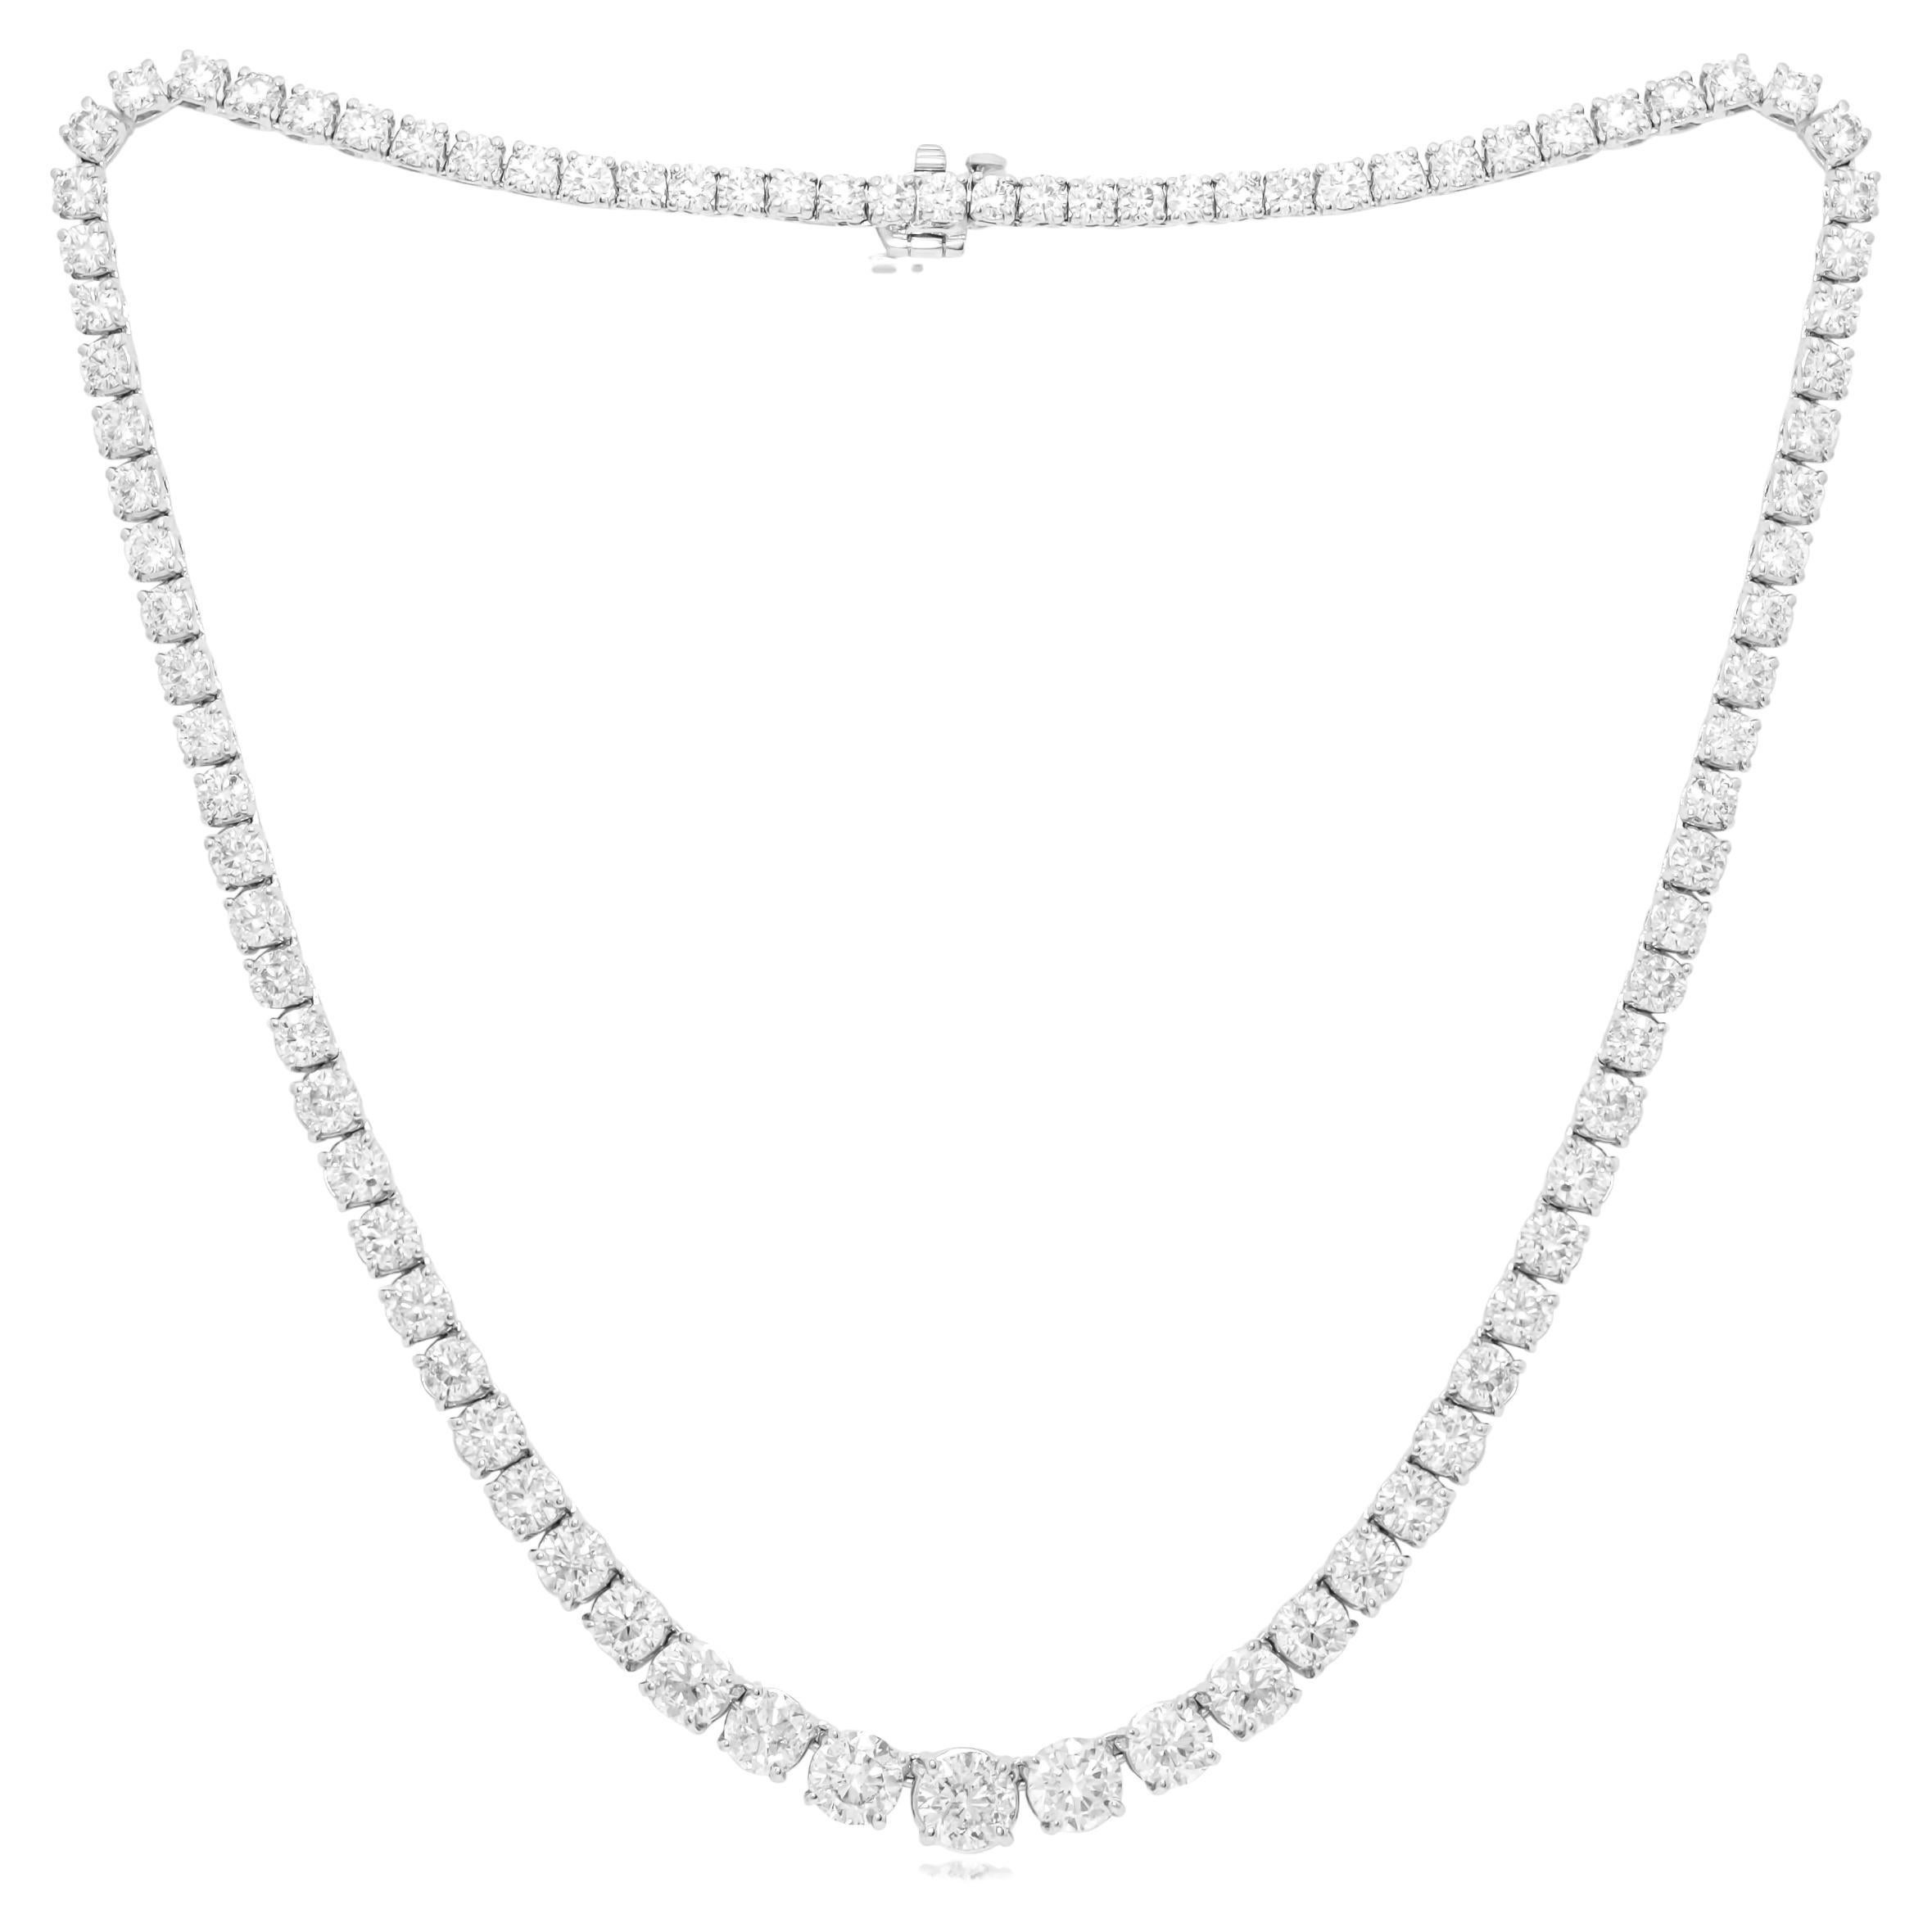 Diana M. 14kt White Gold Graduated Riveira Tennis Necklace  17.60 cts 4 prong For Sale